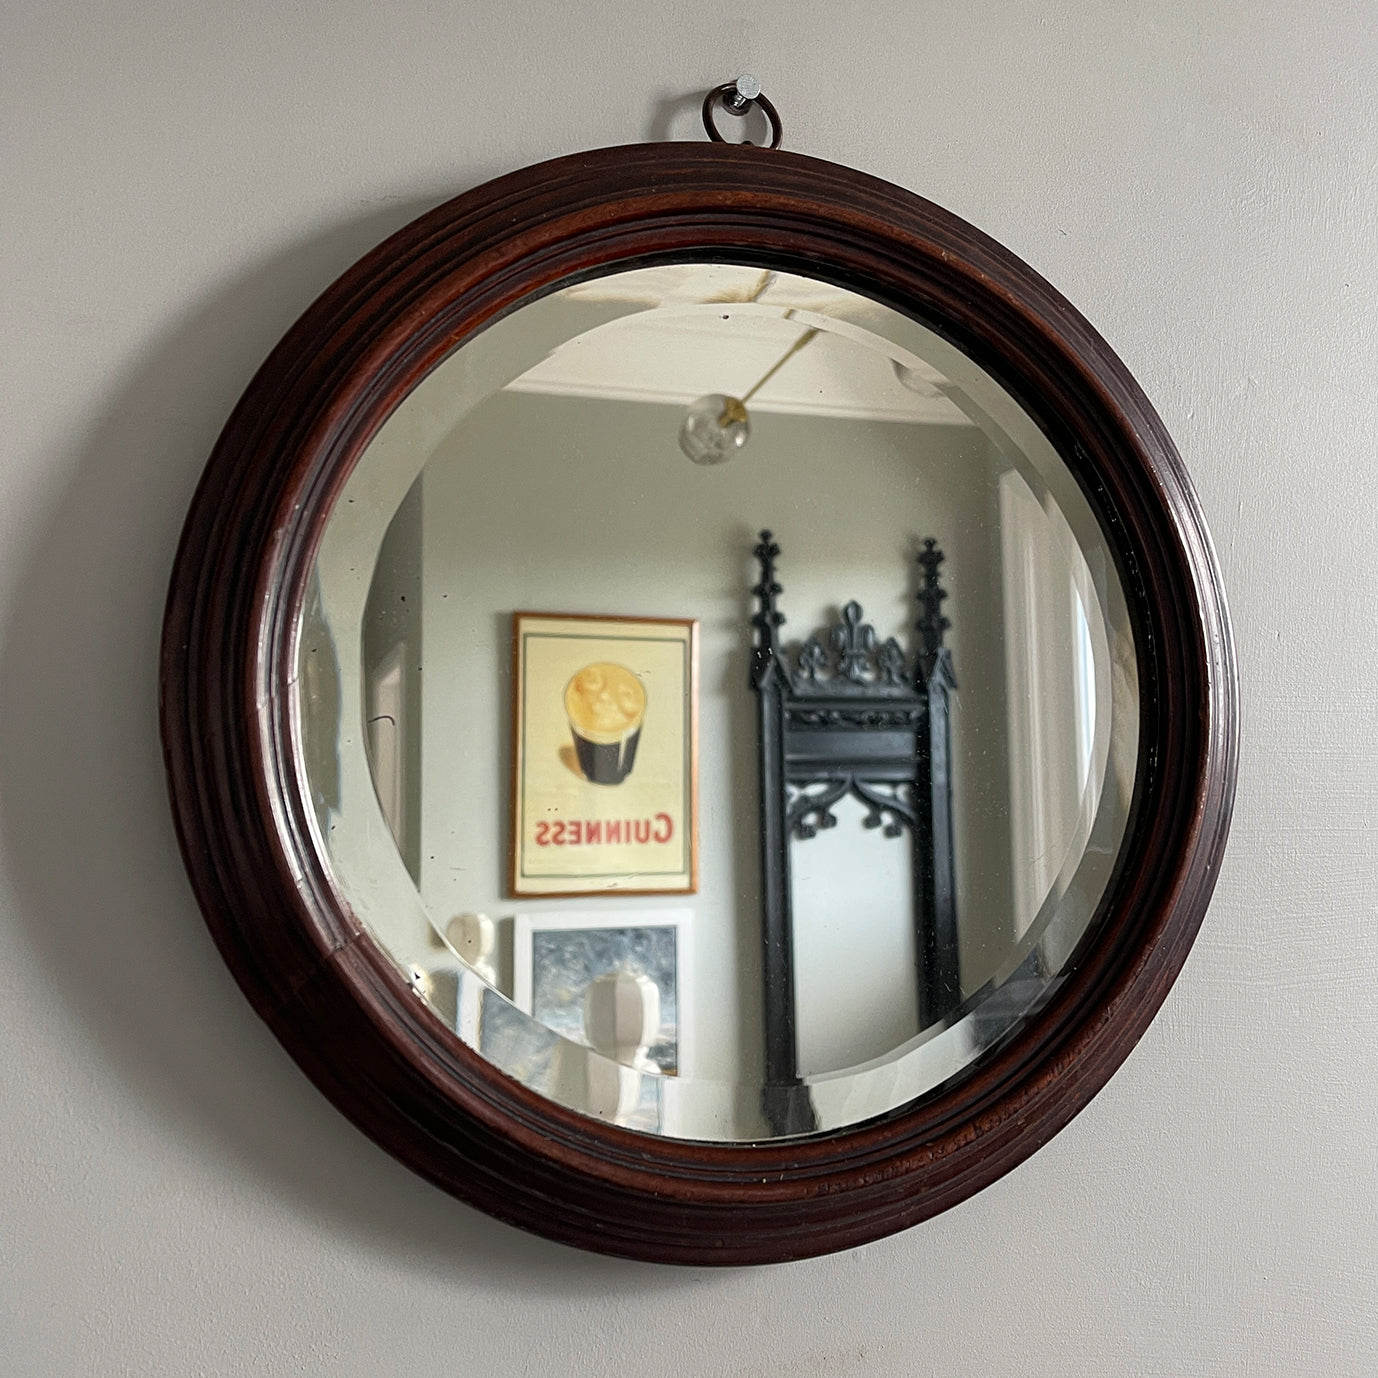 An Antique Wall Mirror with nicely profiled mahogany frame and original beveled glass mirror plate. Backed with a thick mahogany cover and period hanging loop - SHOP NOW - www.intovintage.co.uk